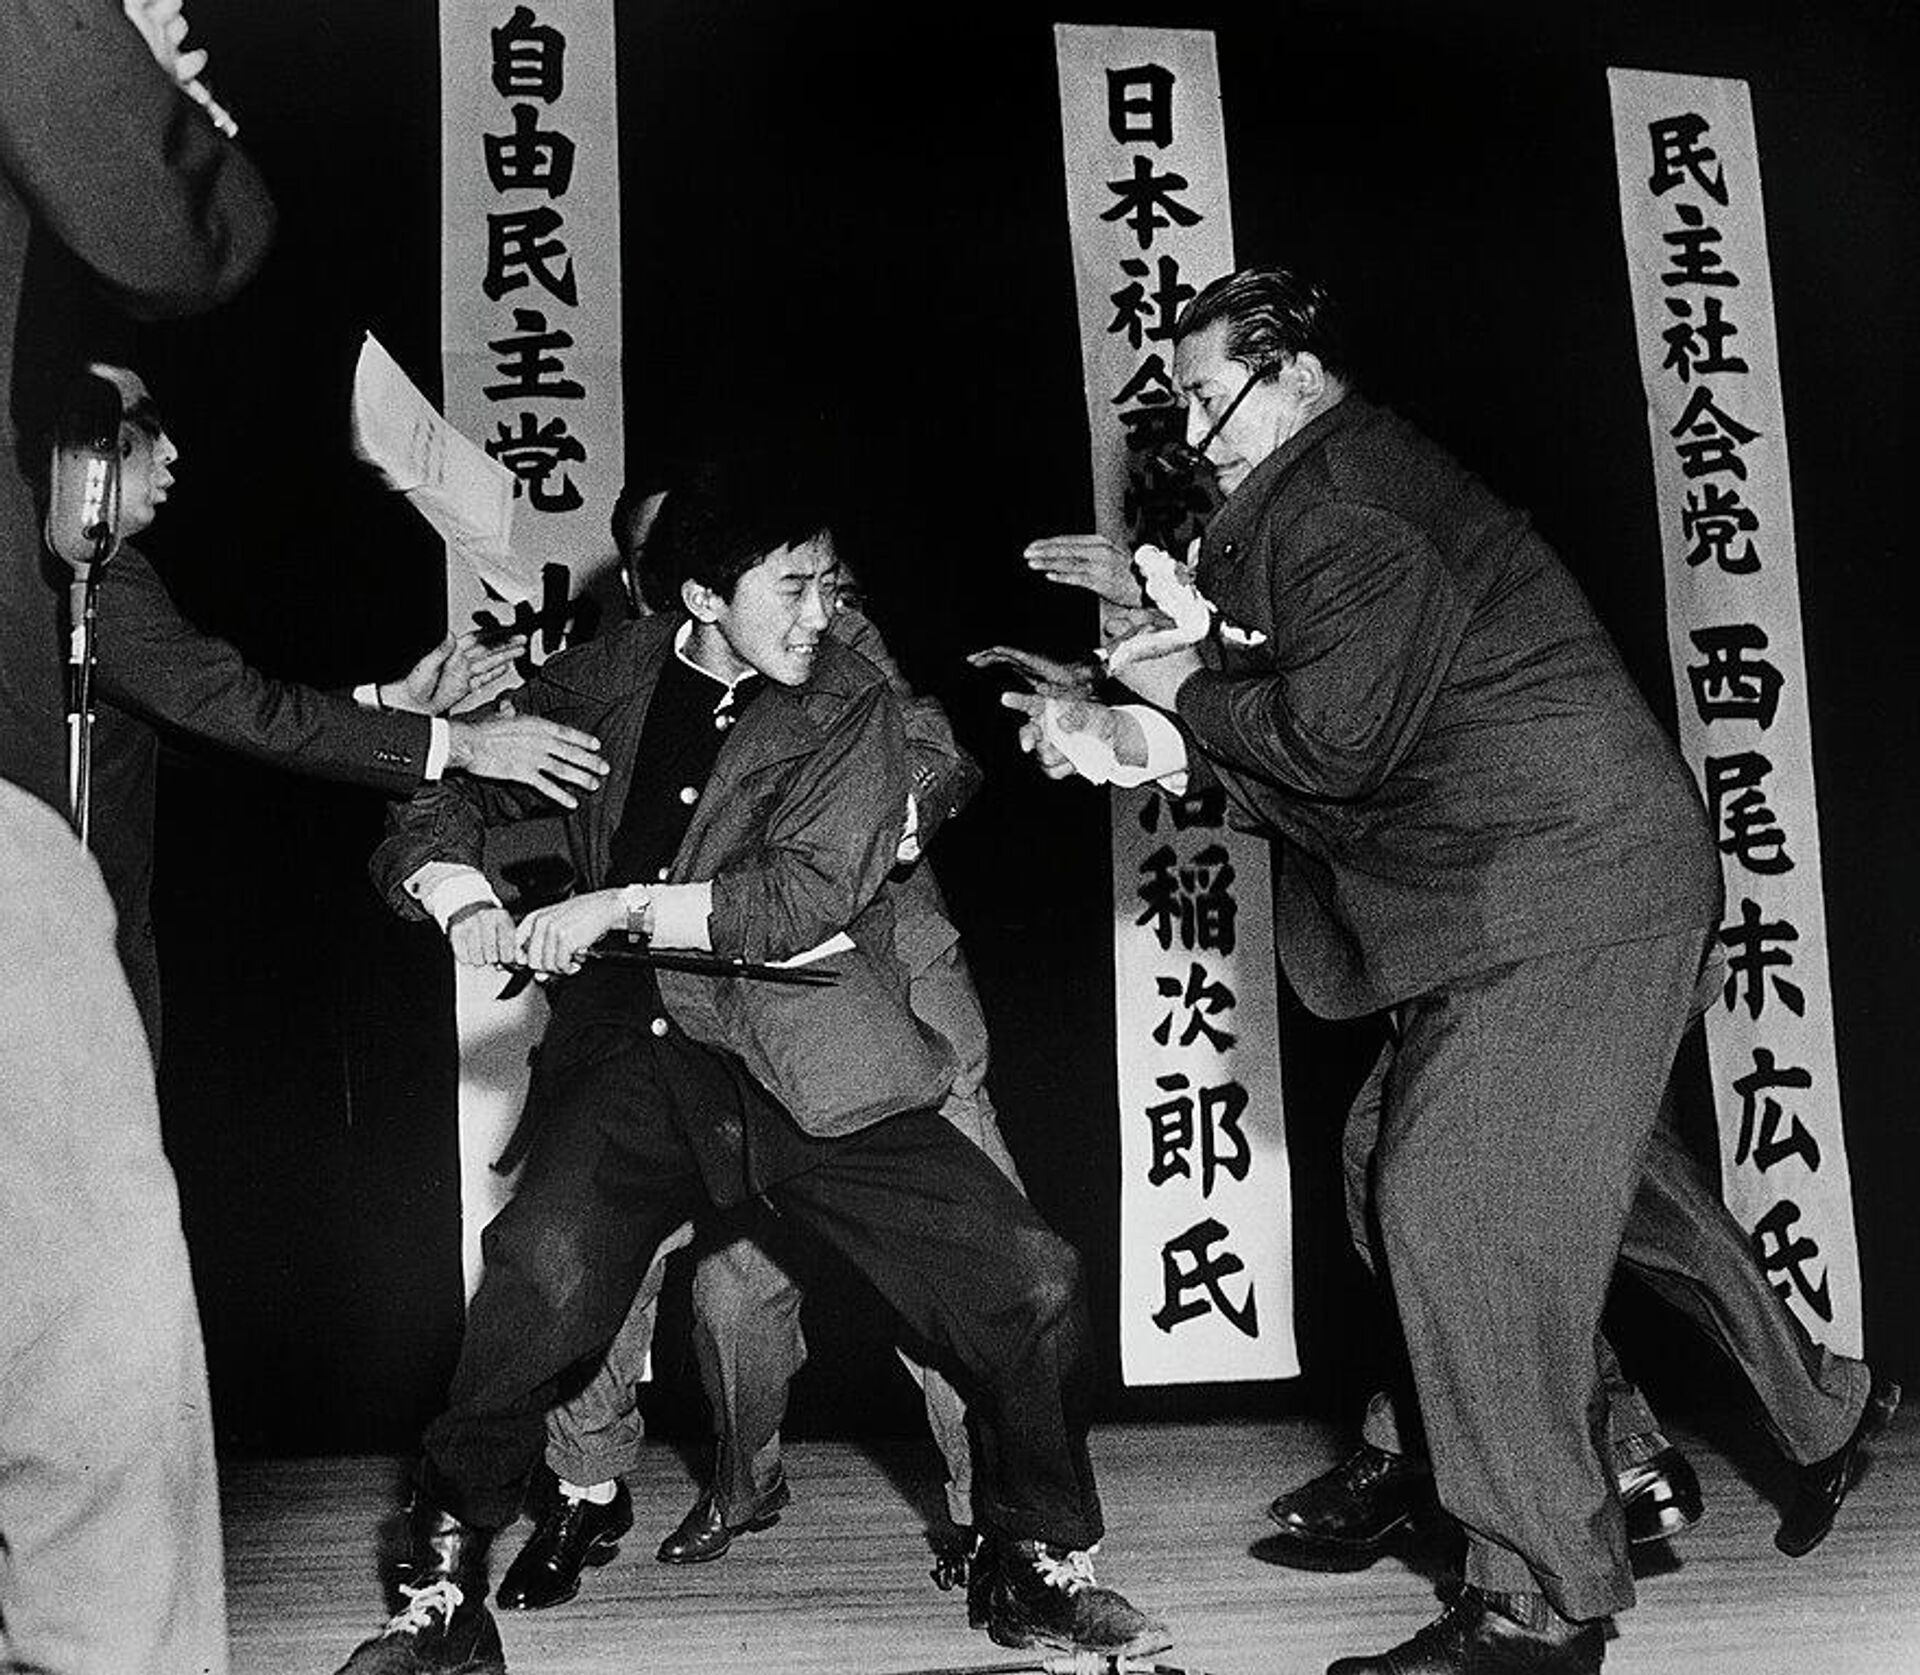 Japanese socialist politician Inejiro Asanuma (61) being stabbed a second time by right-wing ultranationalist Otoya Yamaguchi (17), killing him. This photograph won the 1961 Pulitzer Prize for Photography and World Press Photo of the Year. - Sputnik International, 1920, 08.07.2022